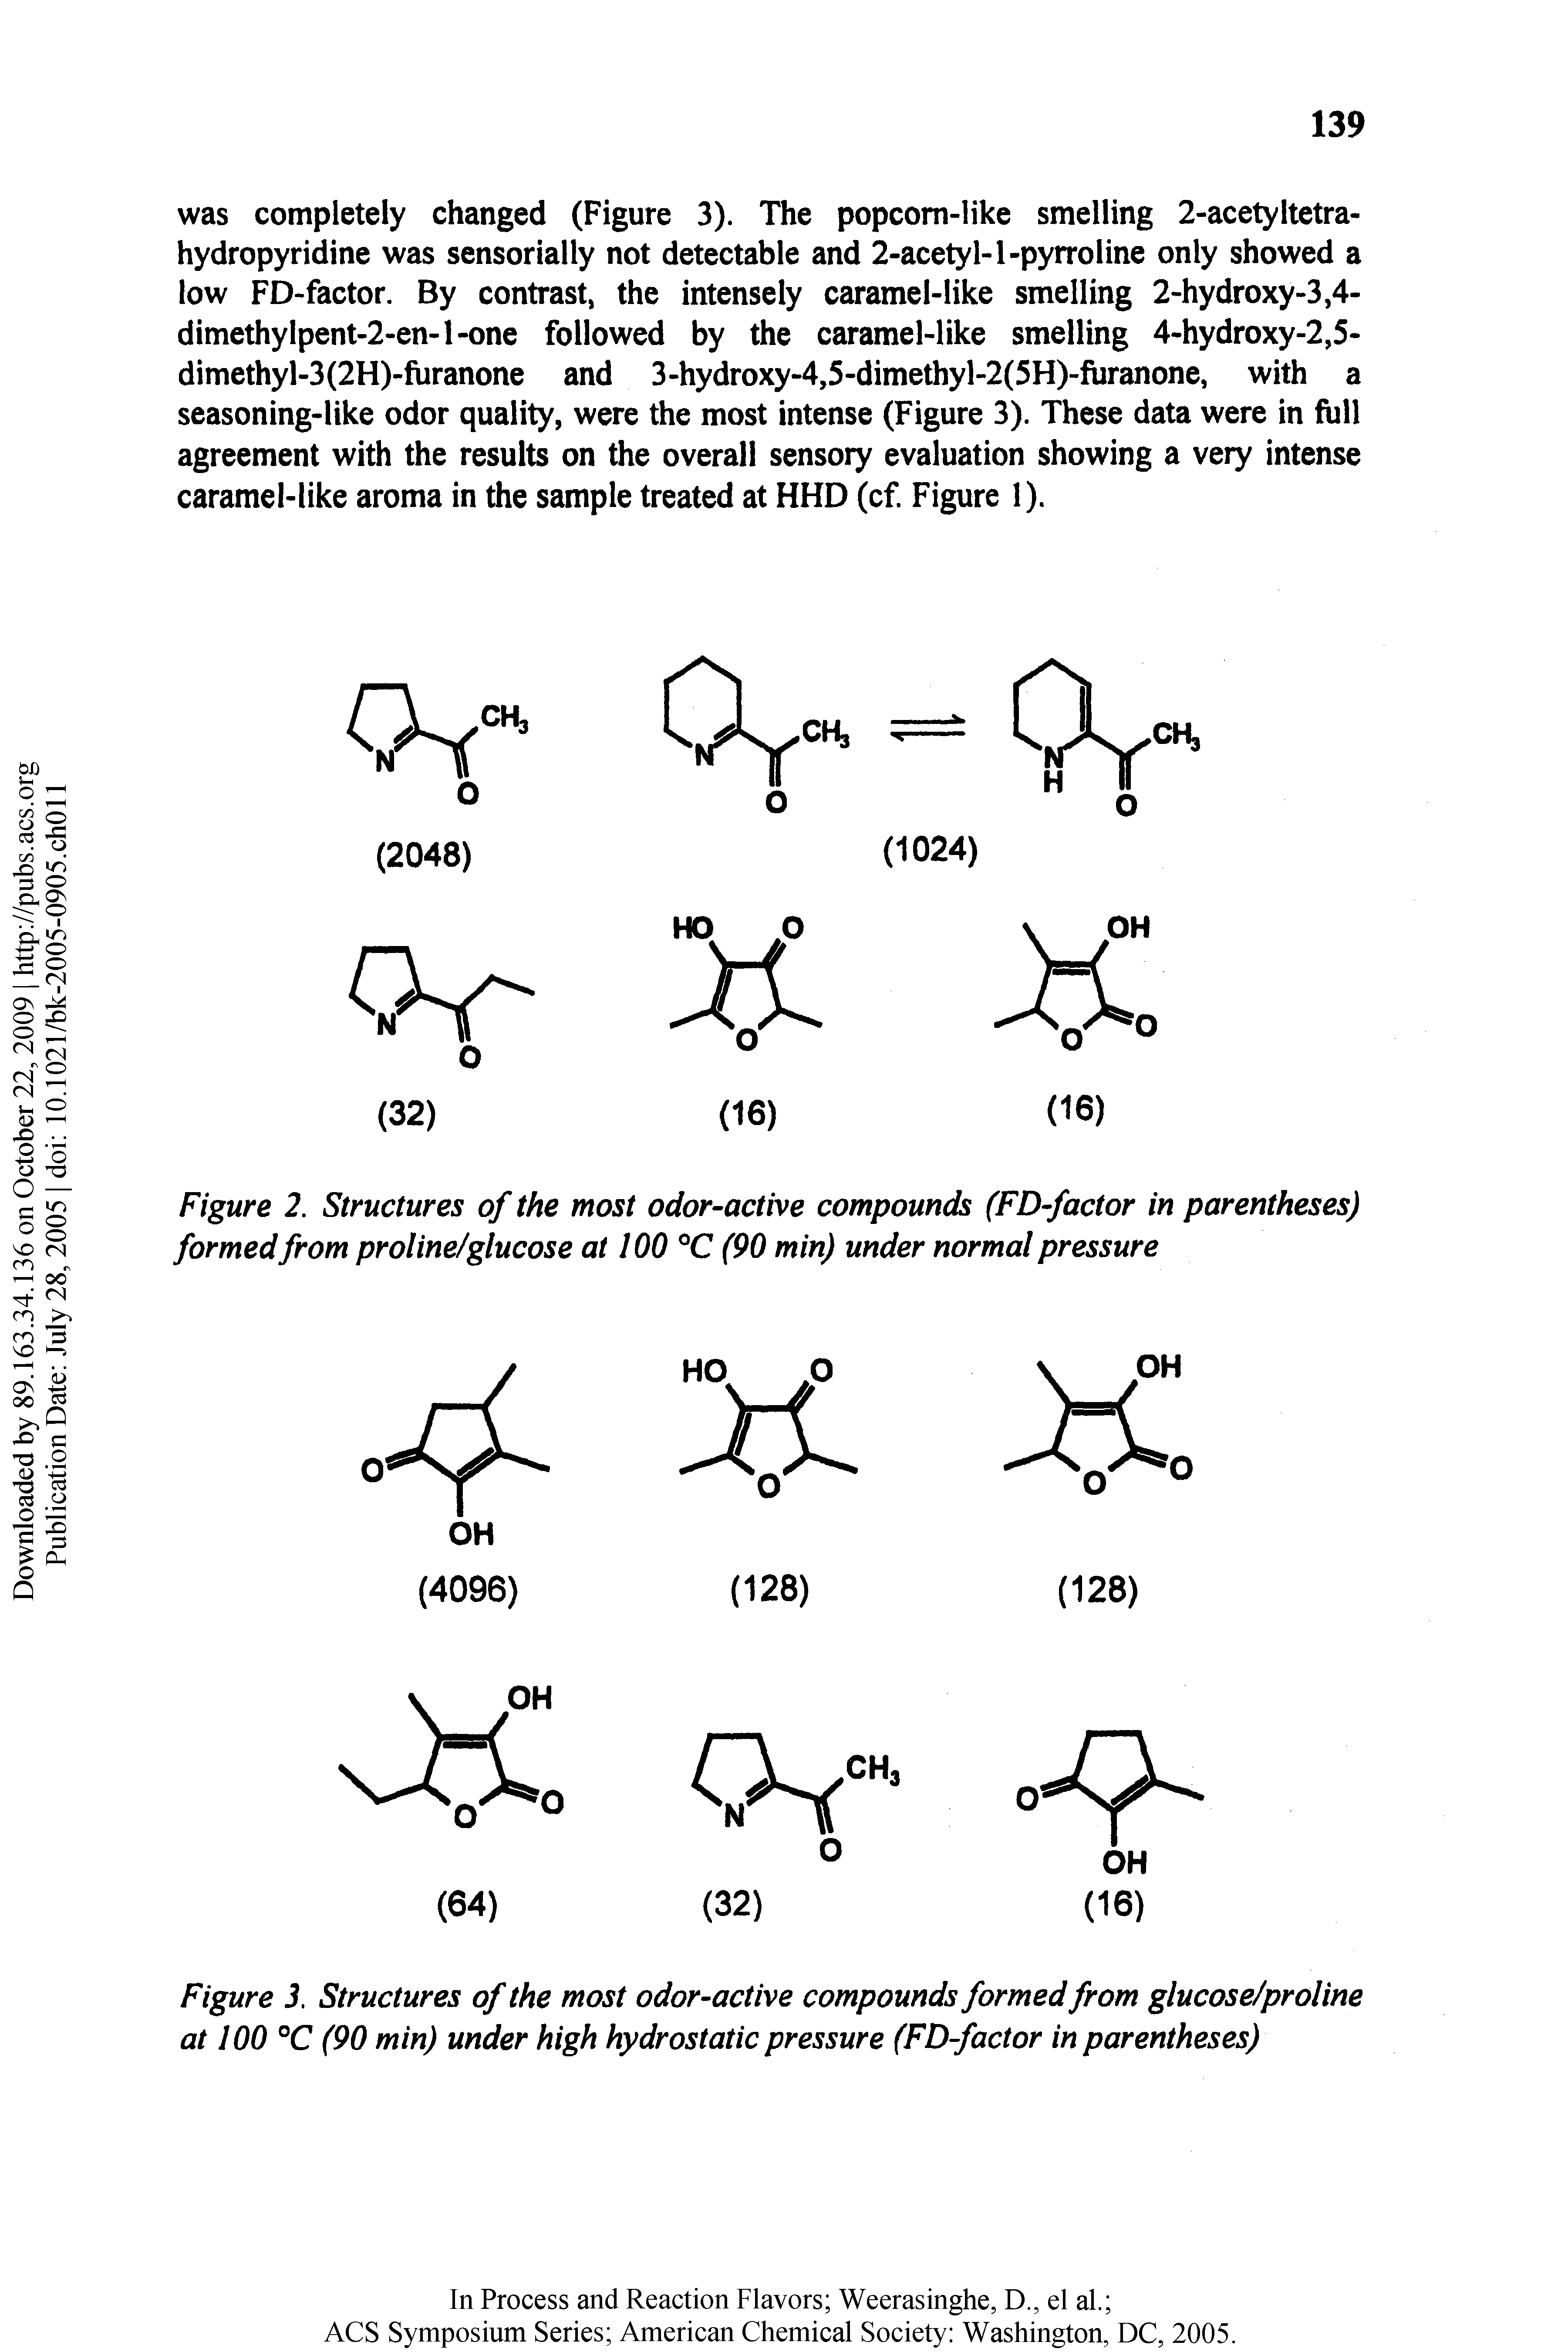 Figure 3. Structures of the most odor-active compounds formed from glucose/proline at 100 °C (90 min) under high hydrostatic pressure (FD-factor in parentheses)...